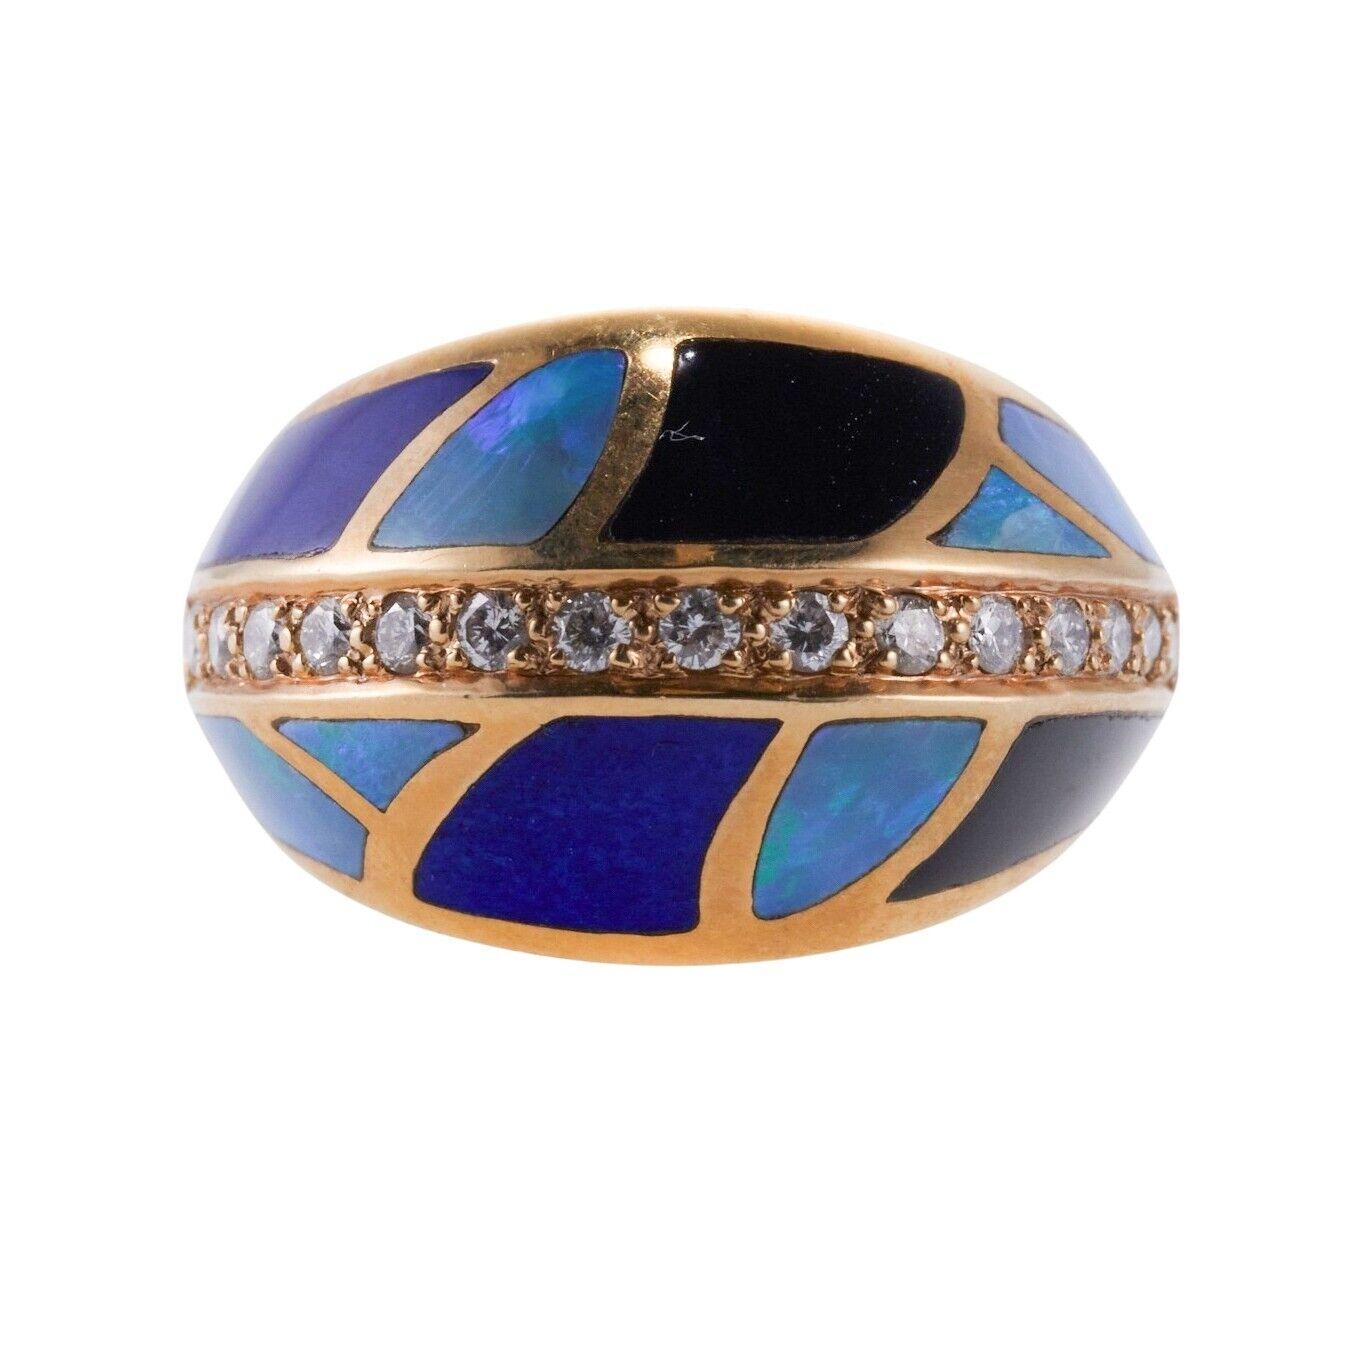 A 14k yellow gold ring set with mother-of-pearl, lapis, onyx, opal and diamonds. Diamonds - approx. 0.30ctw. Ring Size 6.75, 15mm wide. 9.5 grams.